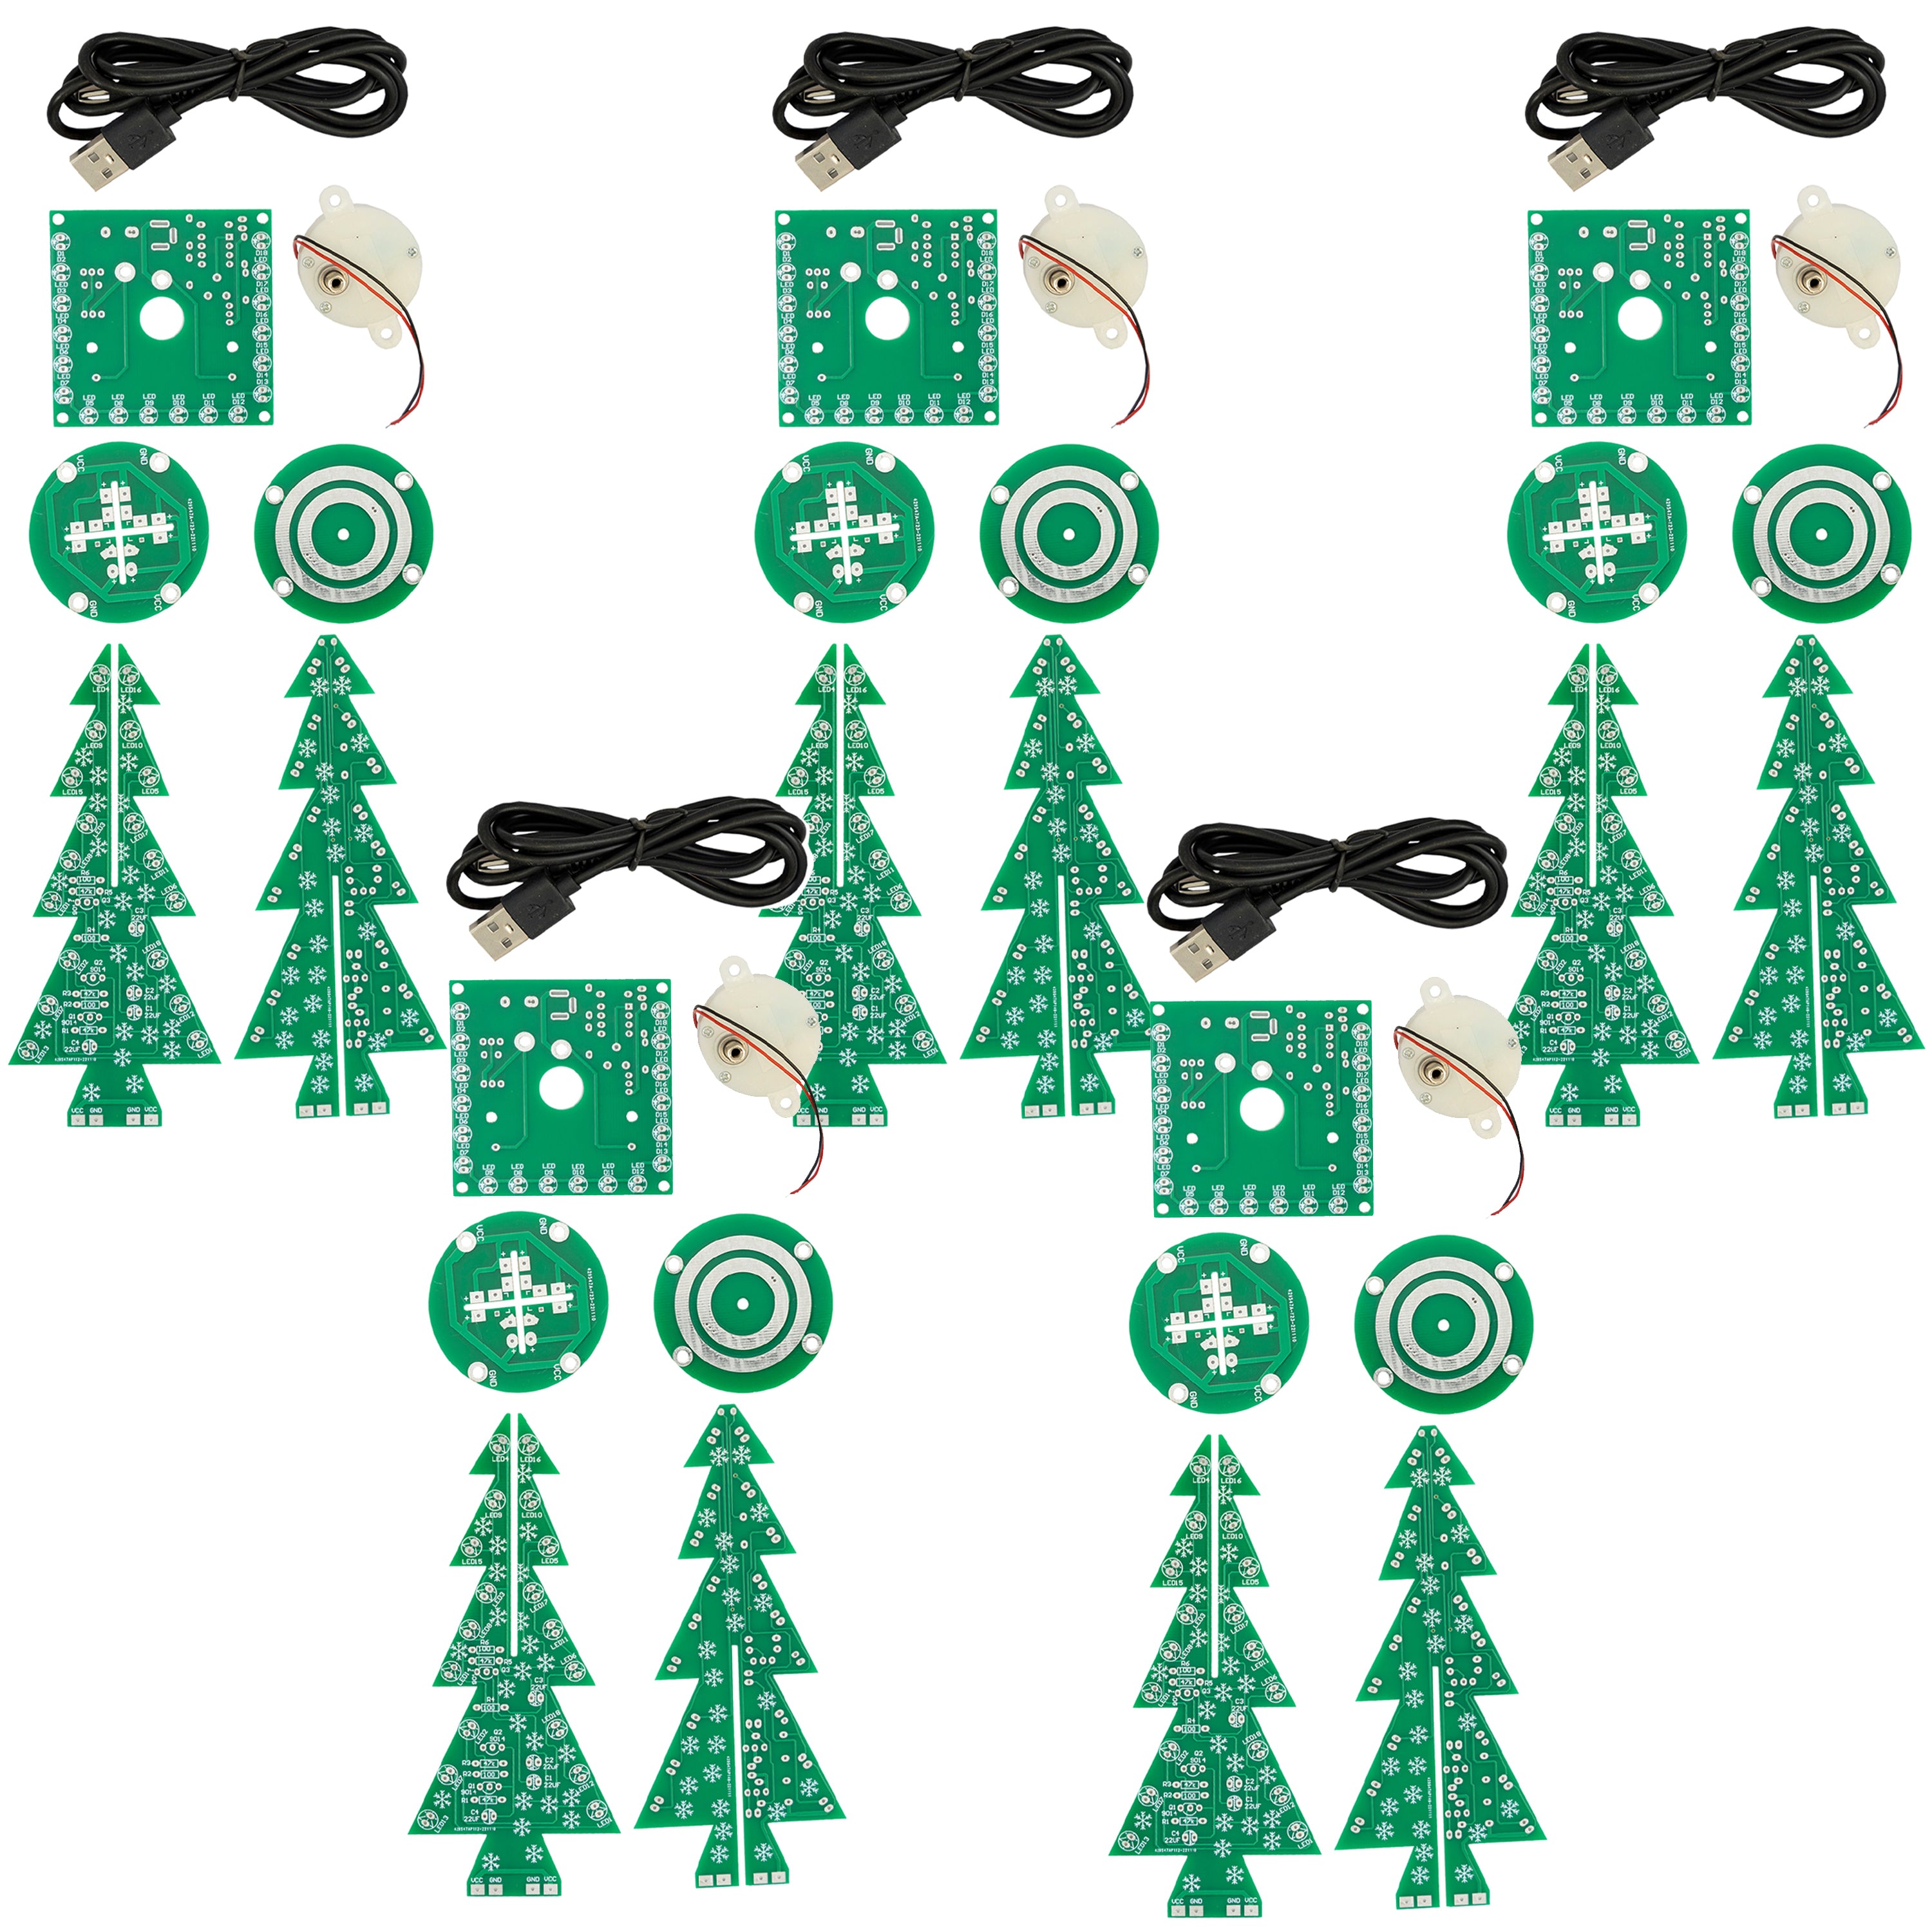 DIY LED Christmas tree kit: Christmas tree electronics kit for soldering - soldering kit for a rotating Christmas tree with LEDs and USB connection